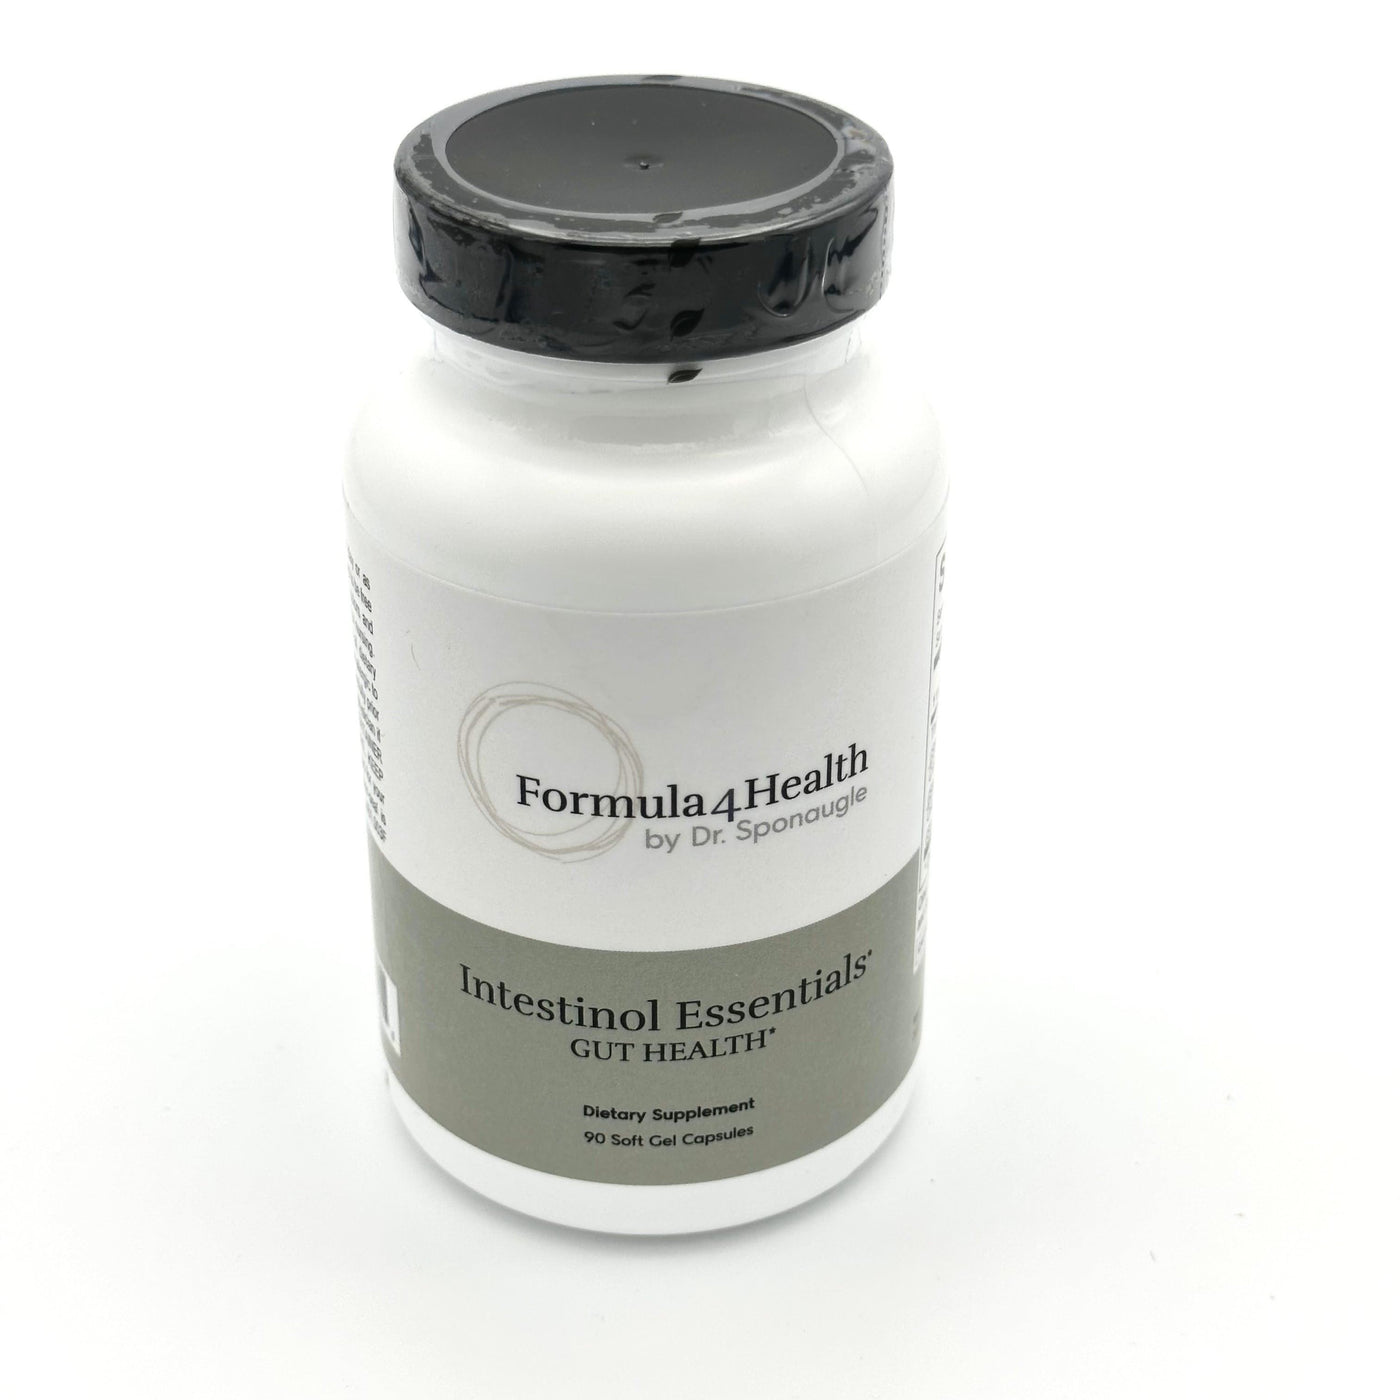 Intestinol Essentials by  Formula 4 Health. Available for online purchase at  Formula For Health.